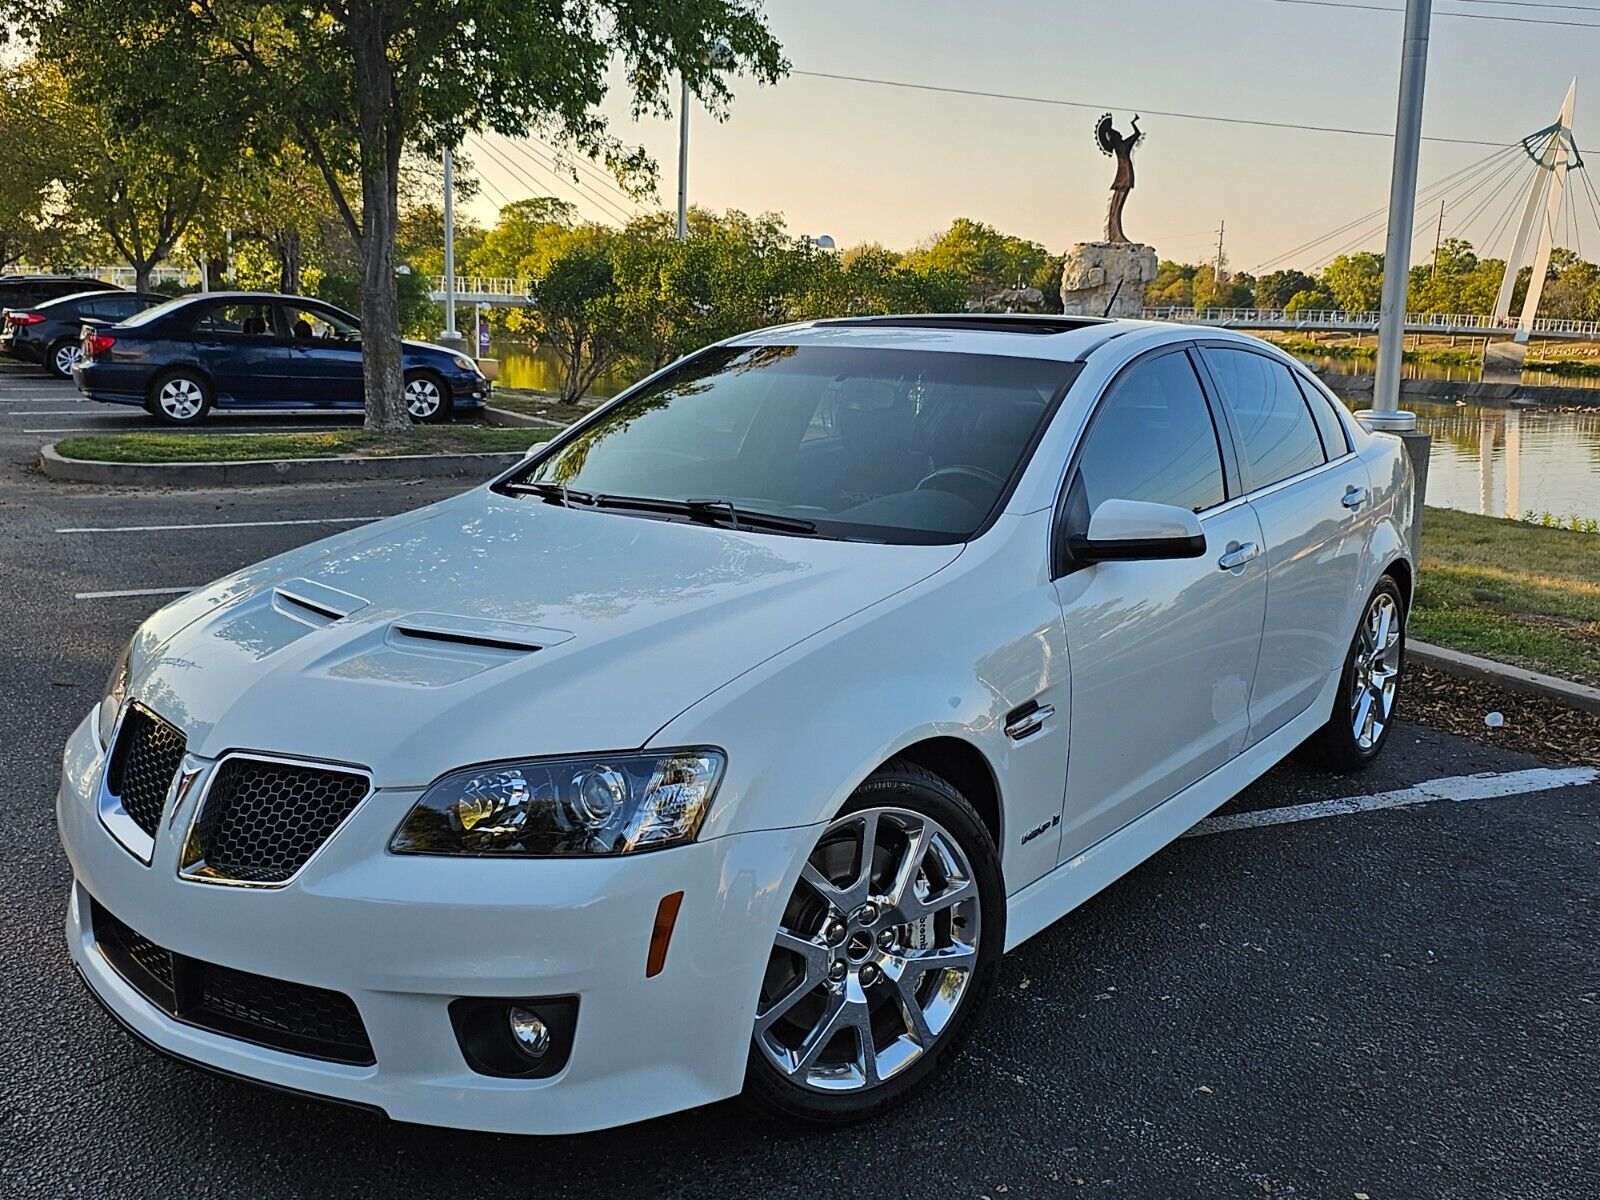 2009 Pontiac G8 GXP, White, Red and Black Leather Seats, Low Mileage, Clean